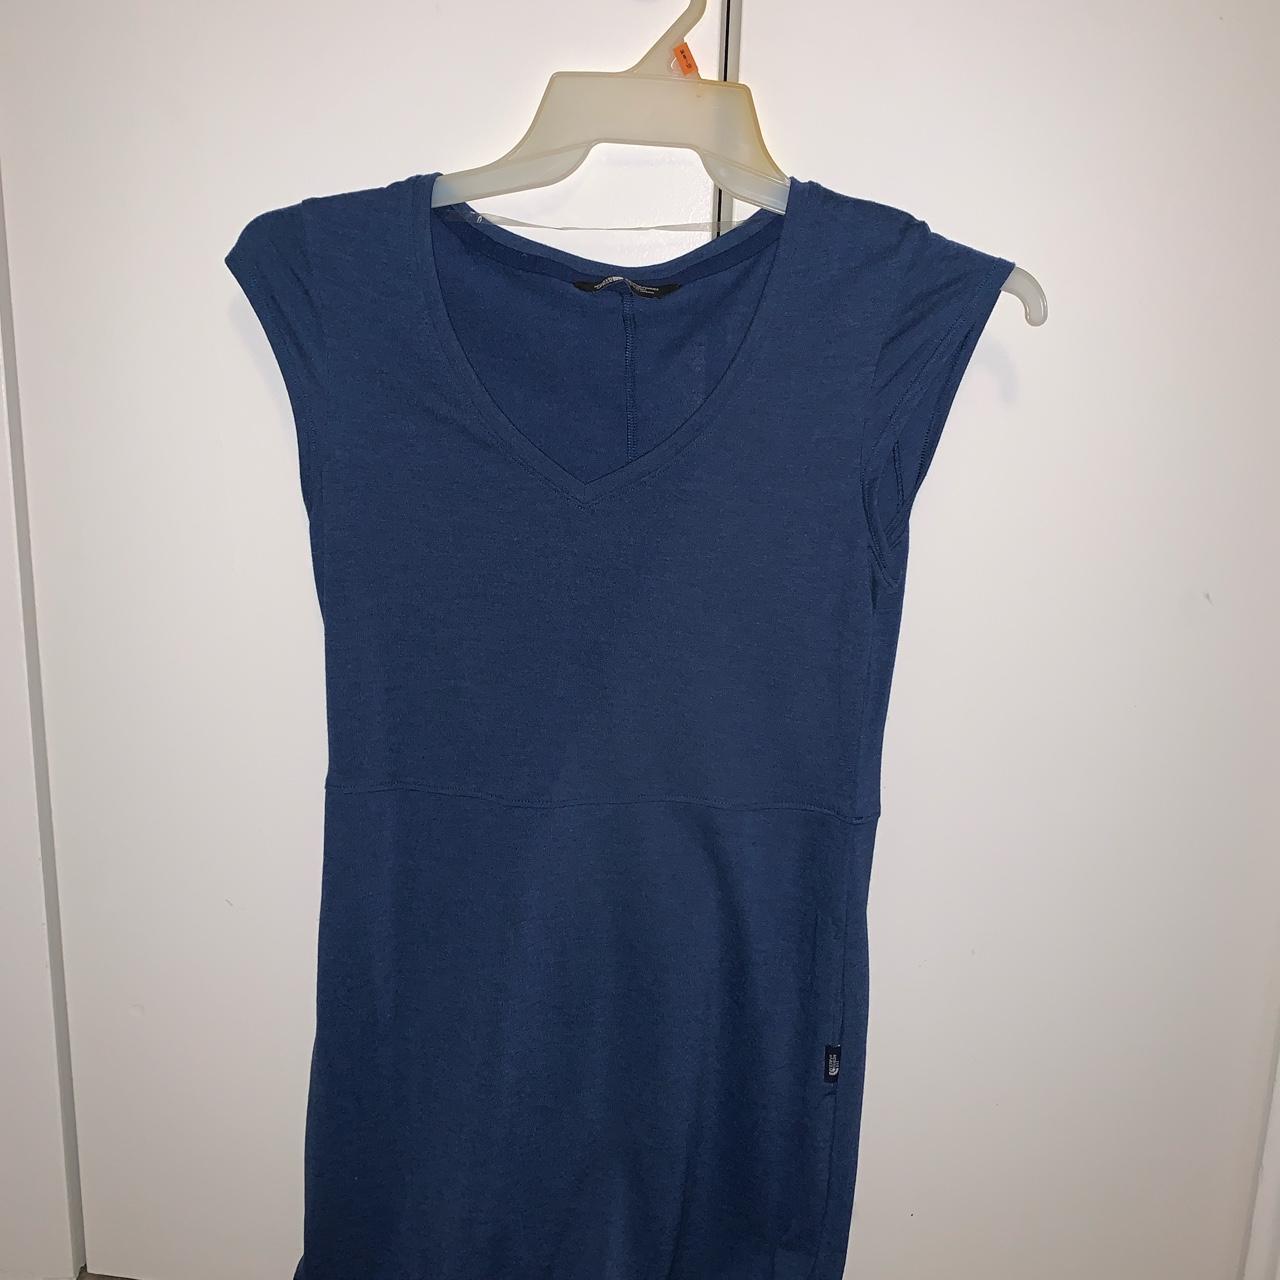 Product Image 2 - Navy Blue North Face Dress